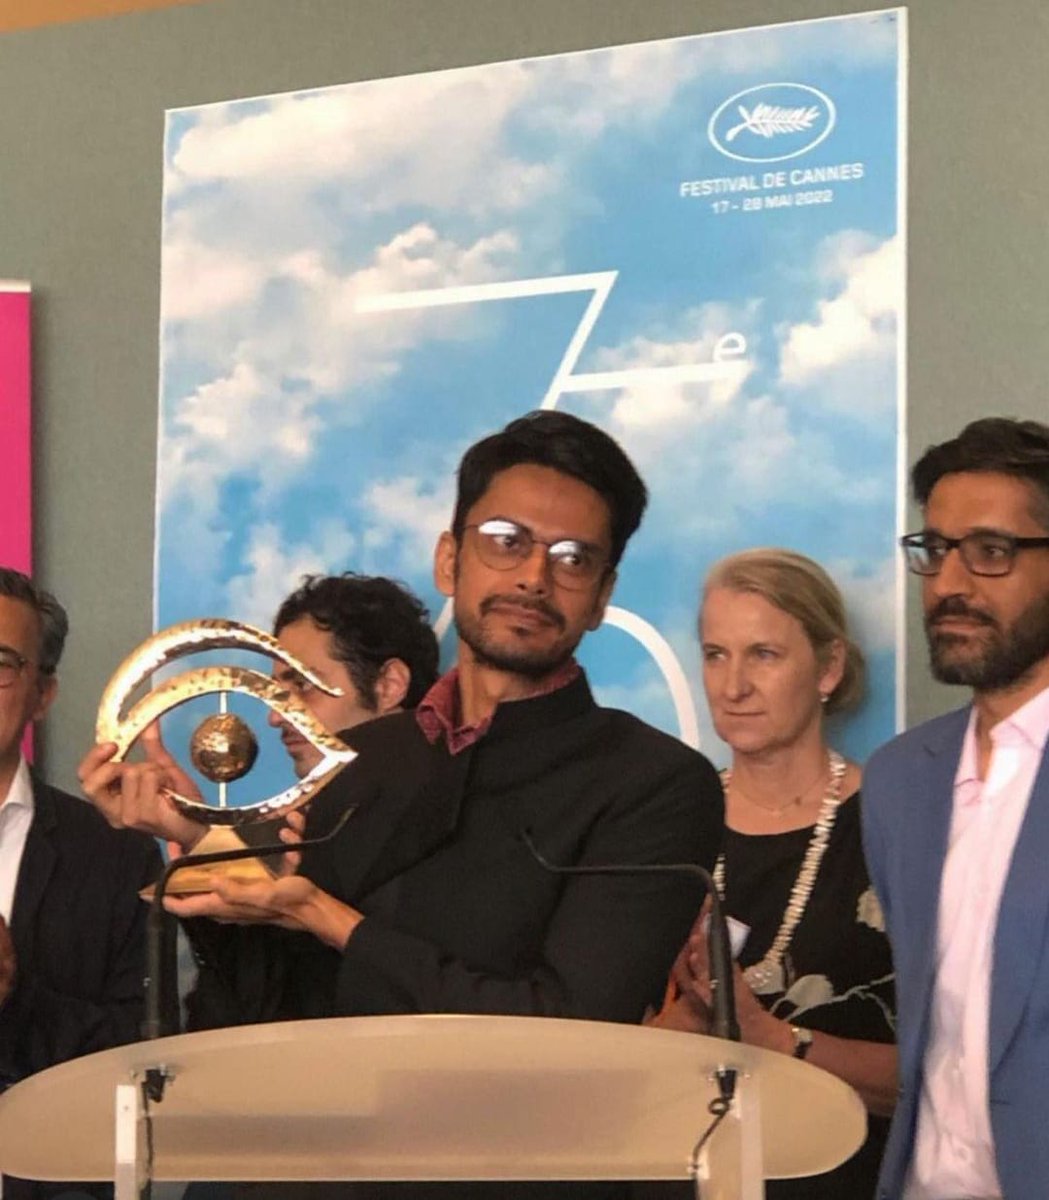 Bravo @shaunaksen for All that breathes big win (L'Œil d'or, le prix du documentaire) 'The Golden Eye, The Documentary Prize at @Festival_Cannes . Making India proud. Saumyananda Sahi heart is bursting with joy!!